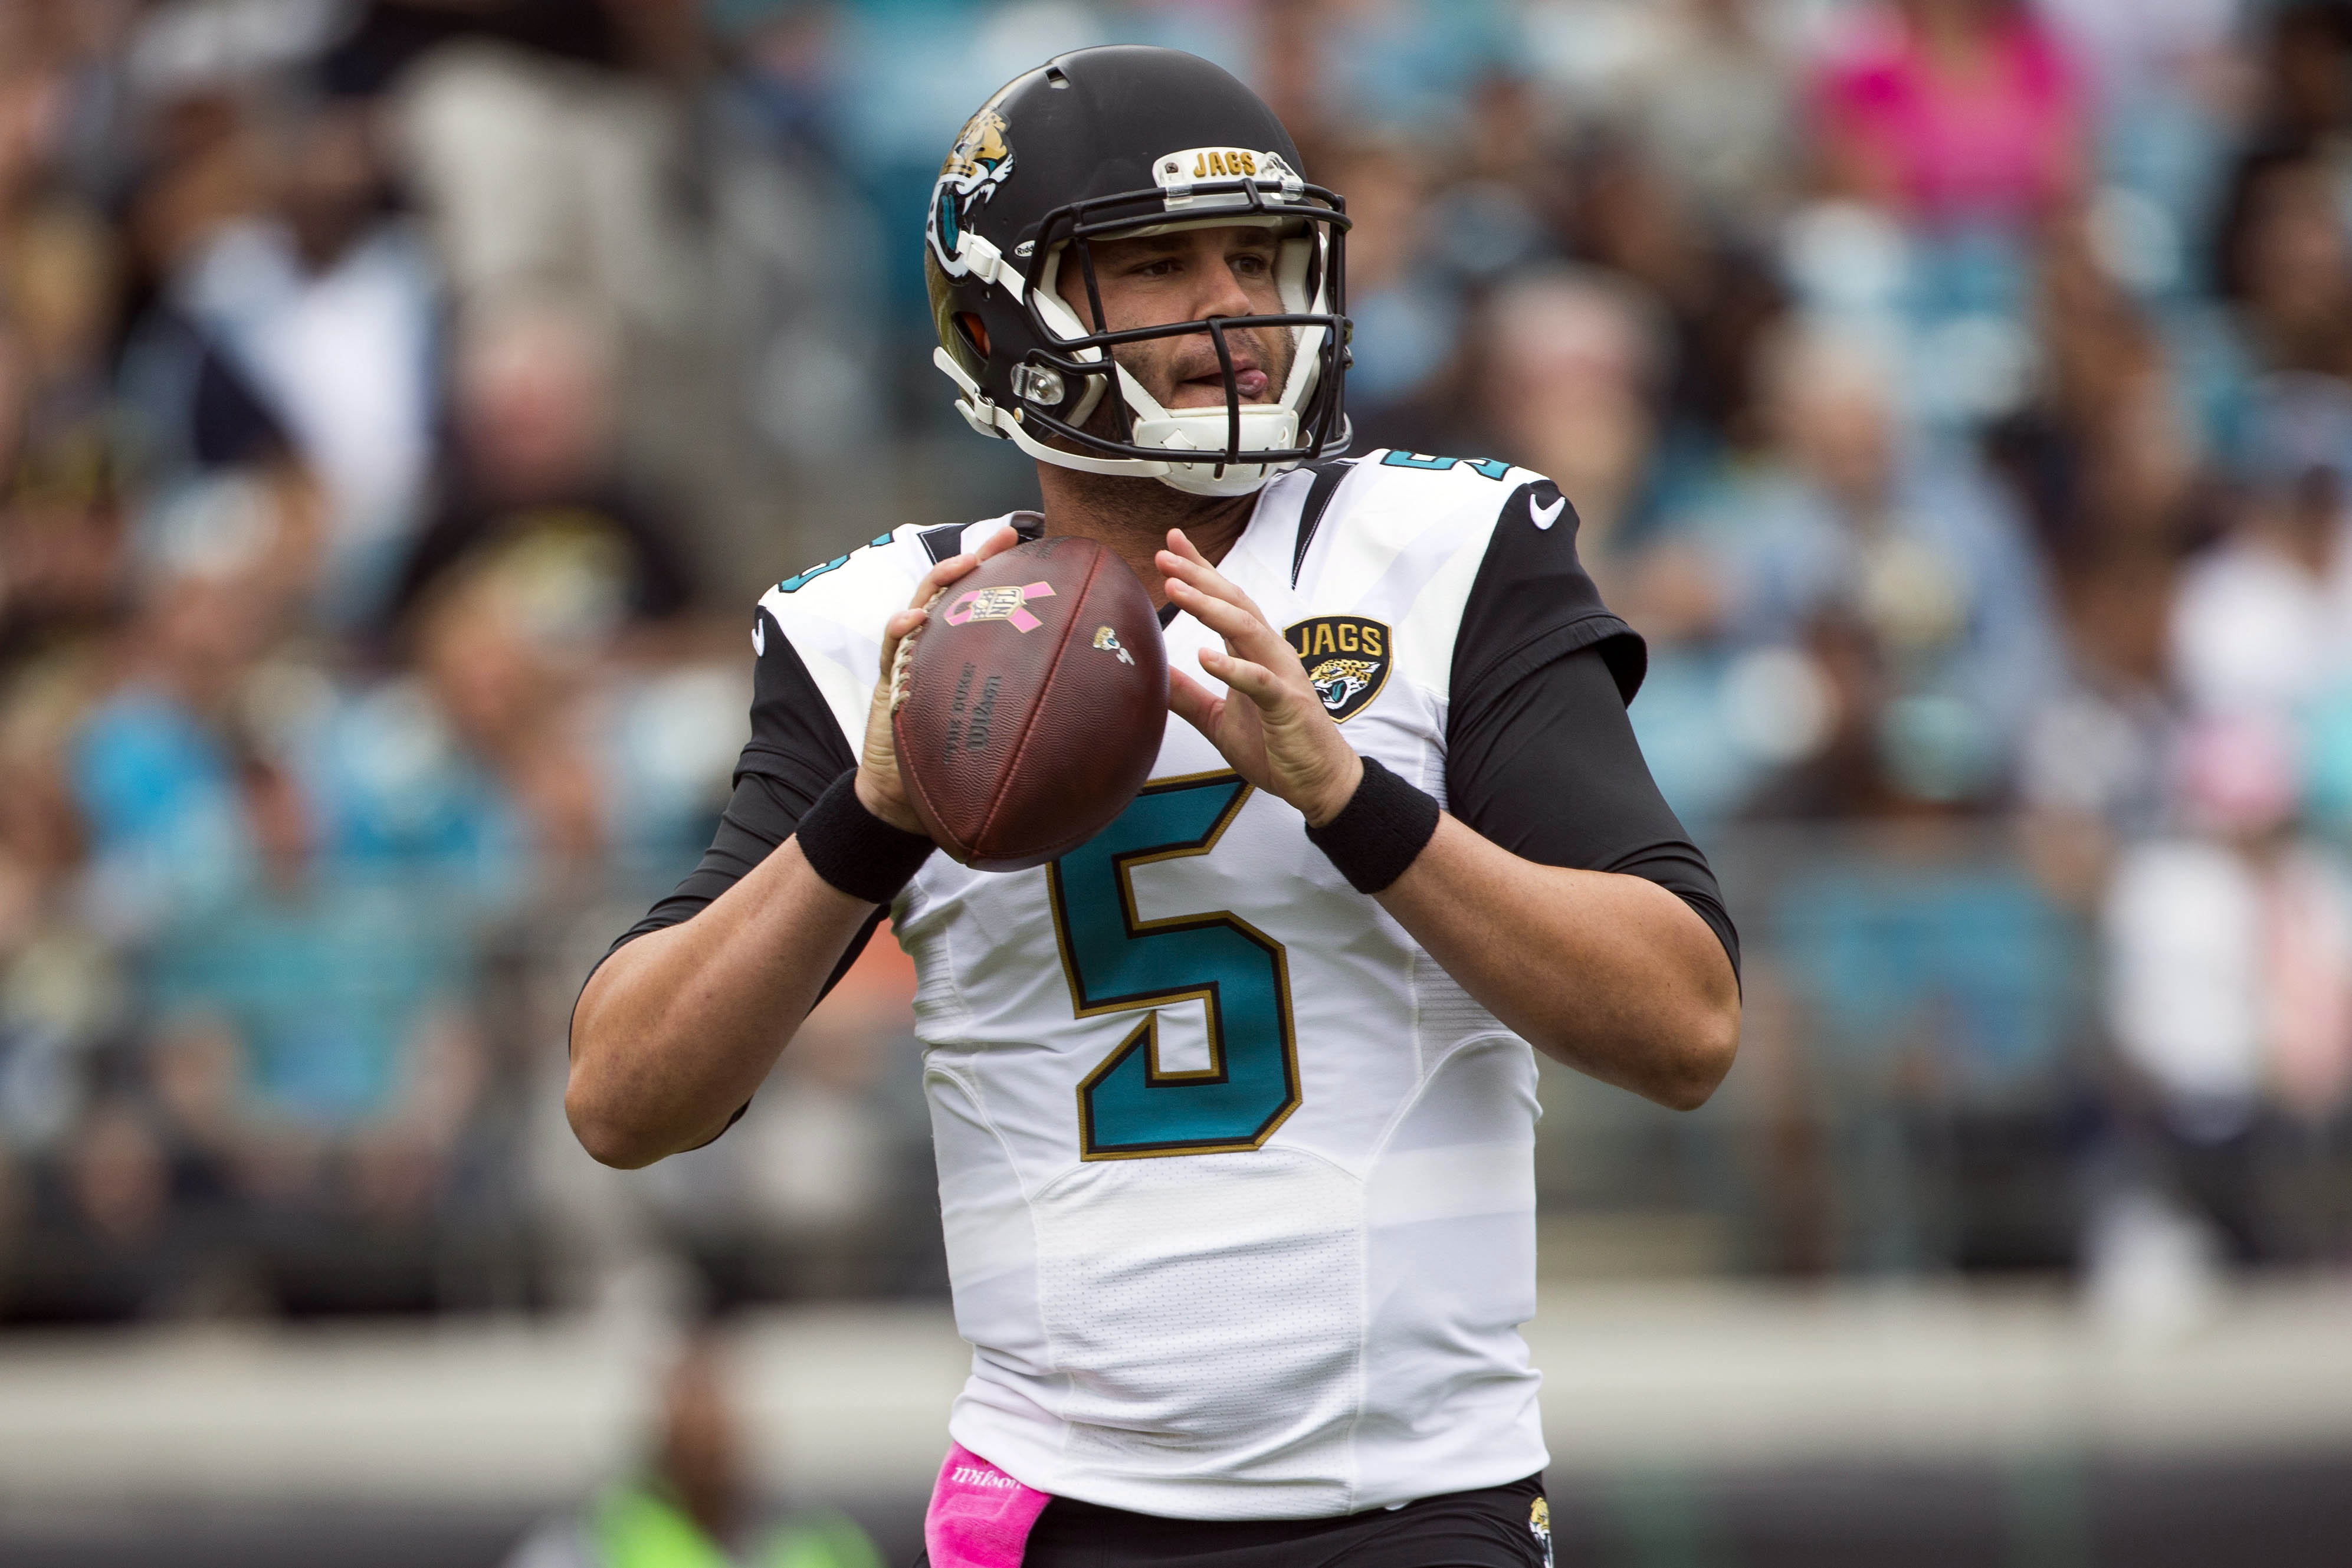 Jonathan Loesche is the President of the Blake Bortles Fan Club. #Bortled